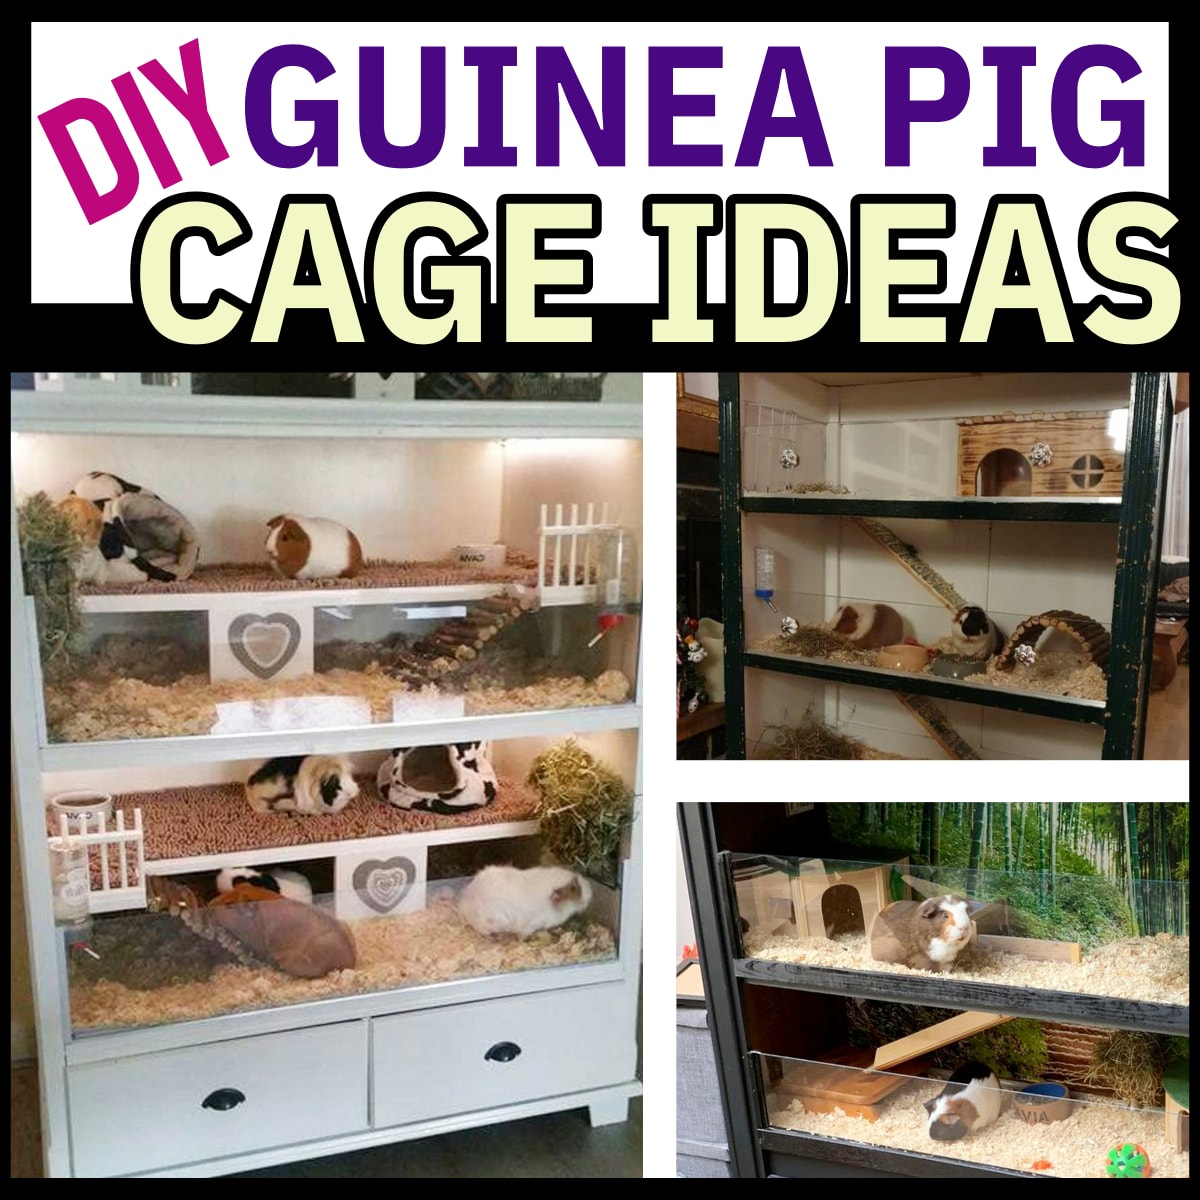 DIY Guinea Pig Cage Ideas and Hutch Set Ups Using Furniture like an old dresser